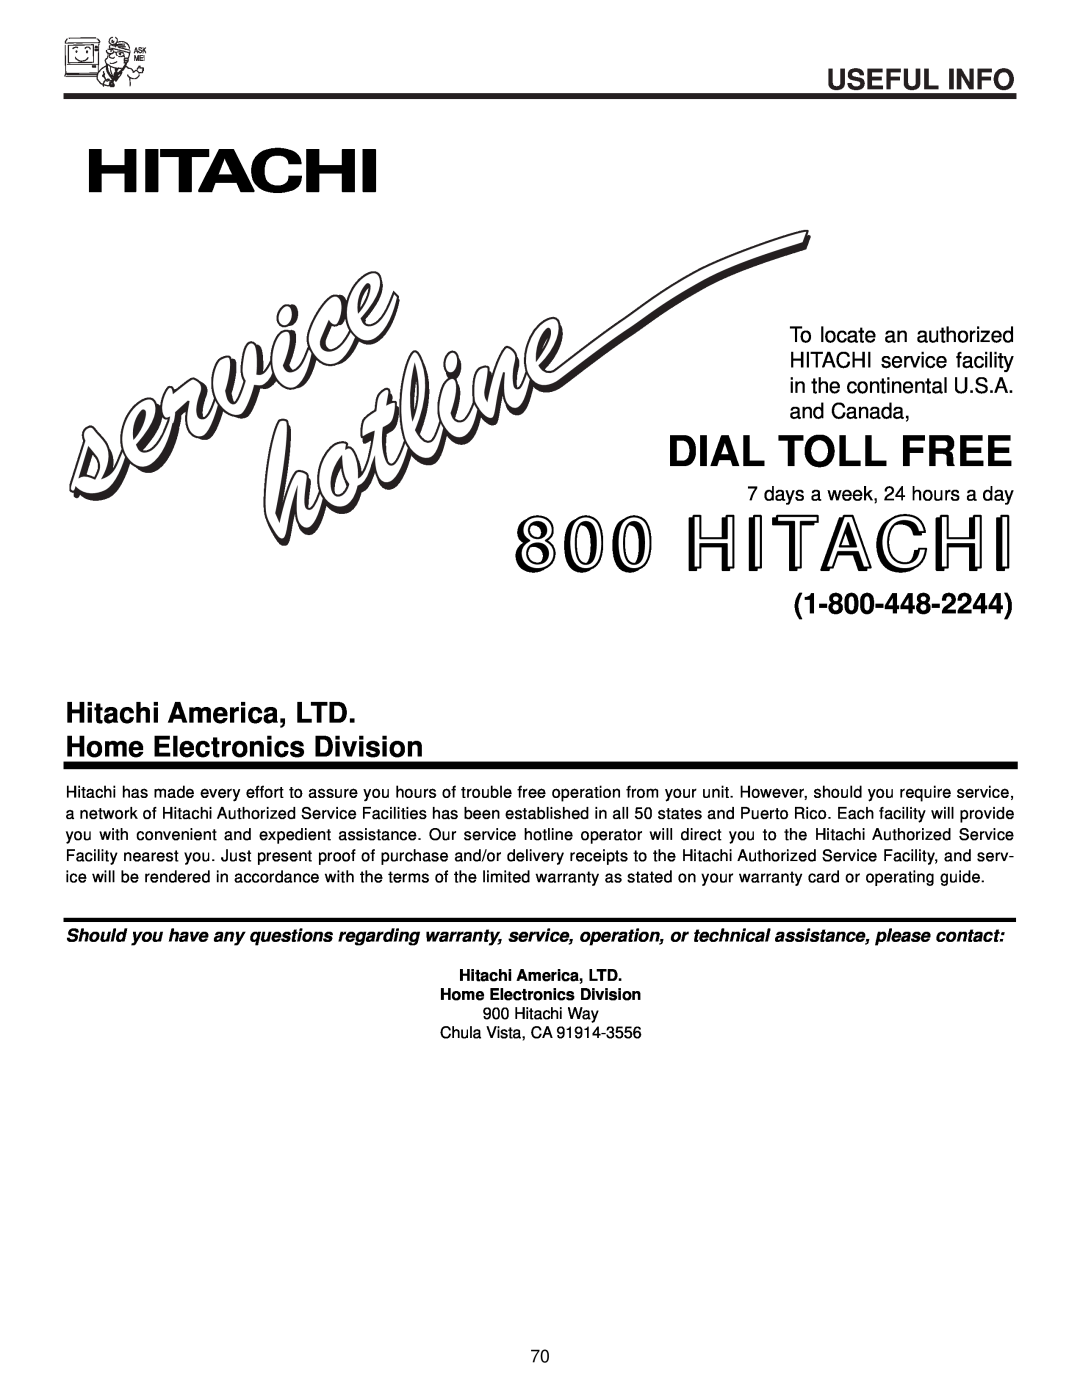 Hitachi 57F510 Home Electronics Division, Hitachi, Dial Toll Free, Useful Info, days a week, 24 hours a day 